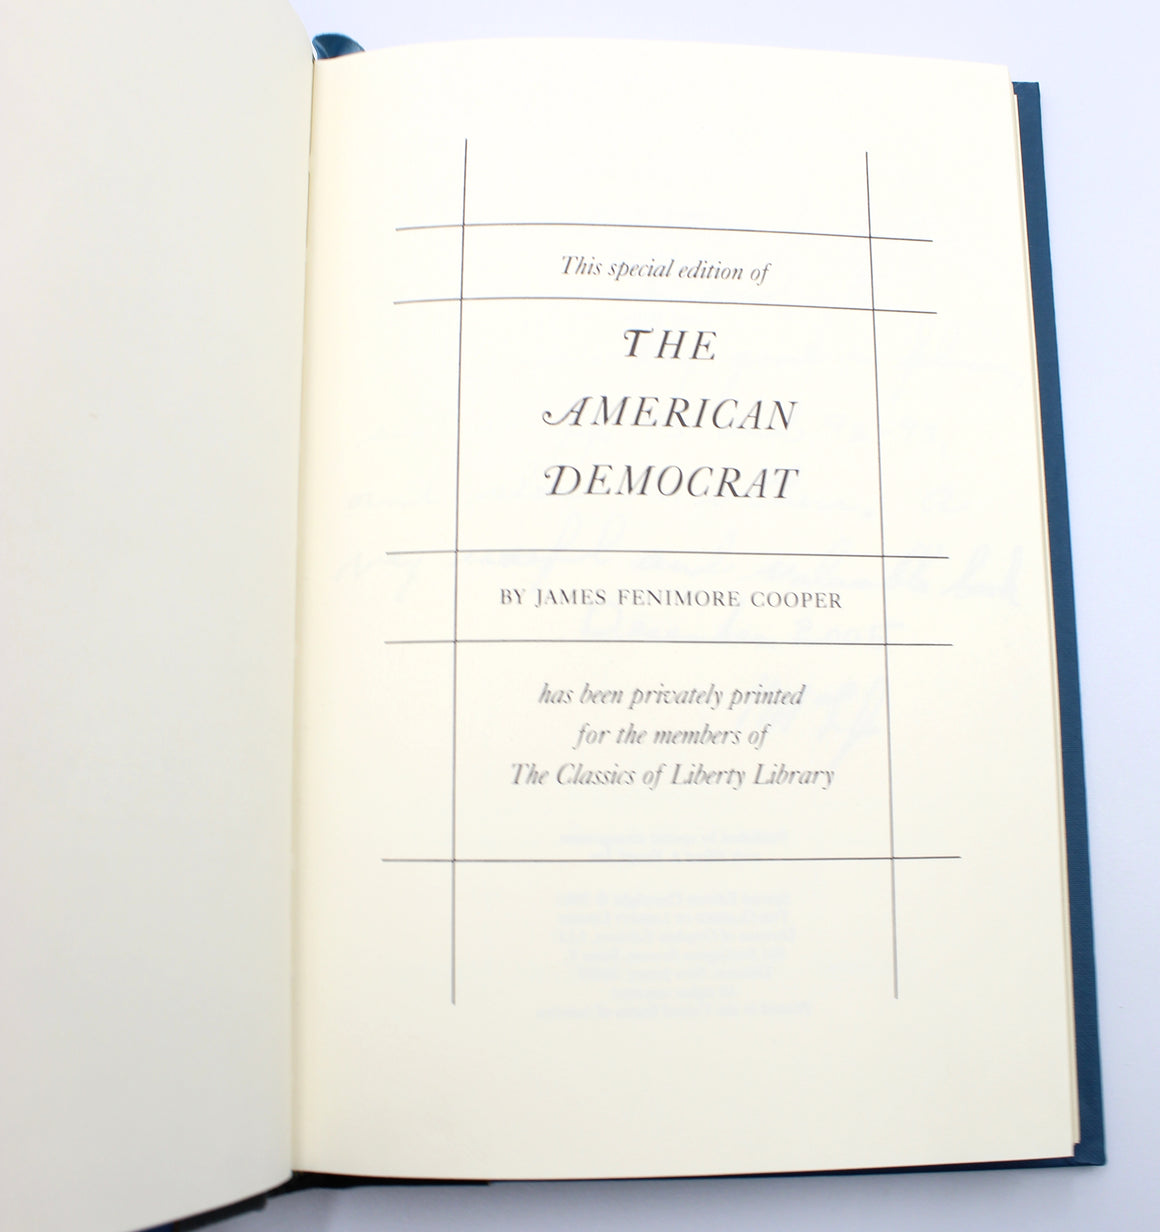 The American Democrat by James Fenimore Cooper, Classics of Liberty Library Edition, 2003